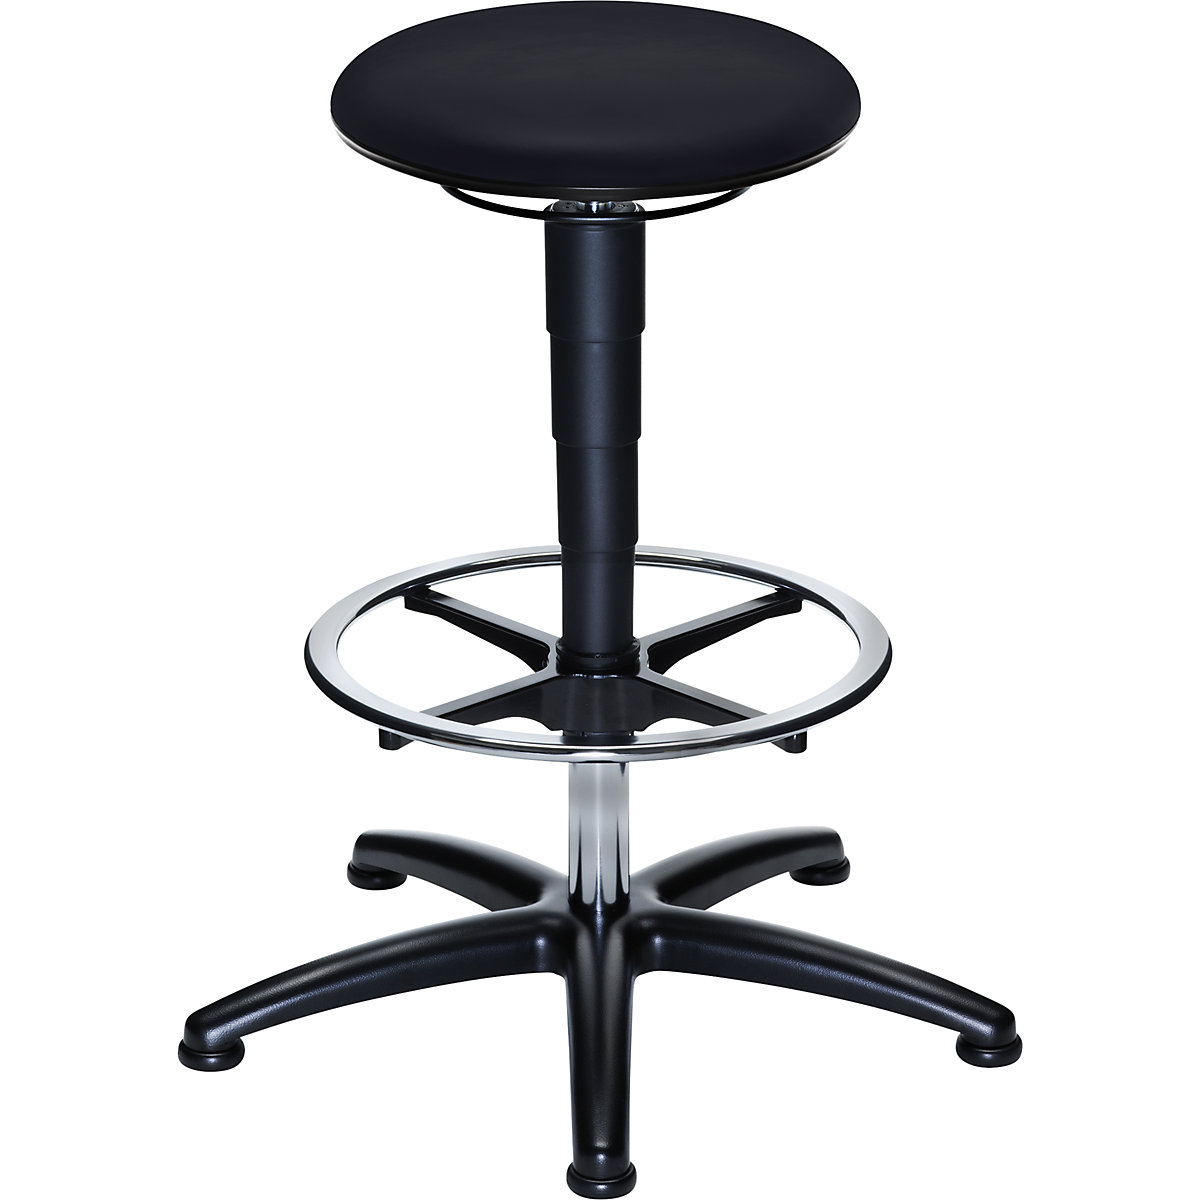 Industrial stool with gas lift height adjustment – eurokraft pro, black vinyl seat, with floor glides and foot ring-3